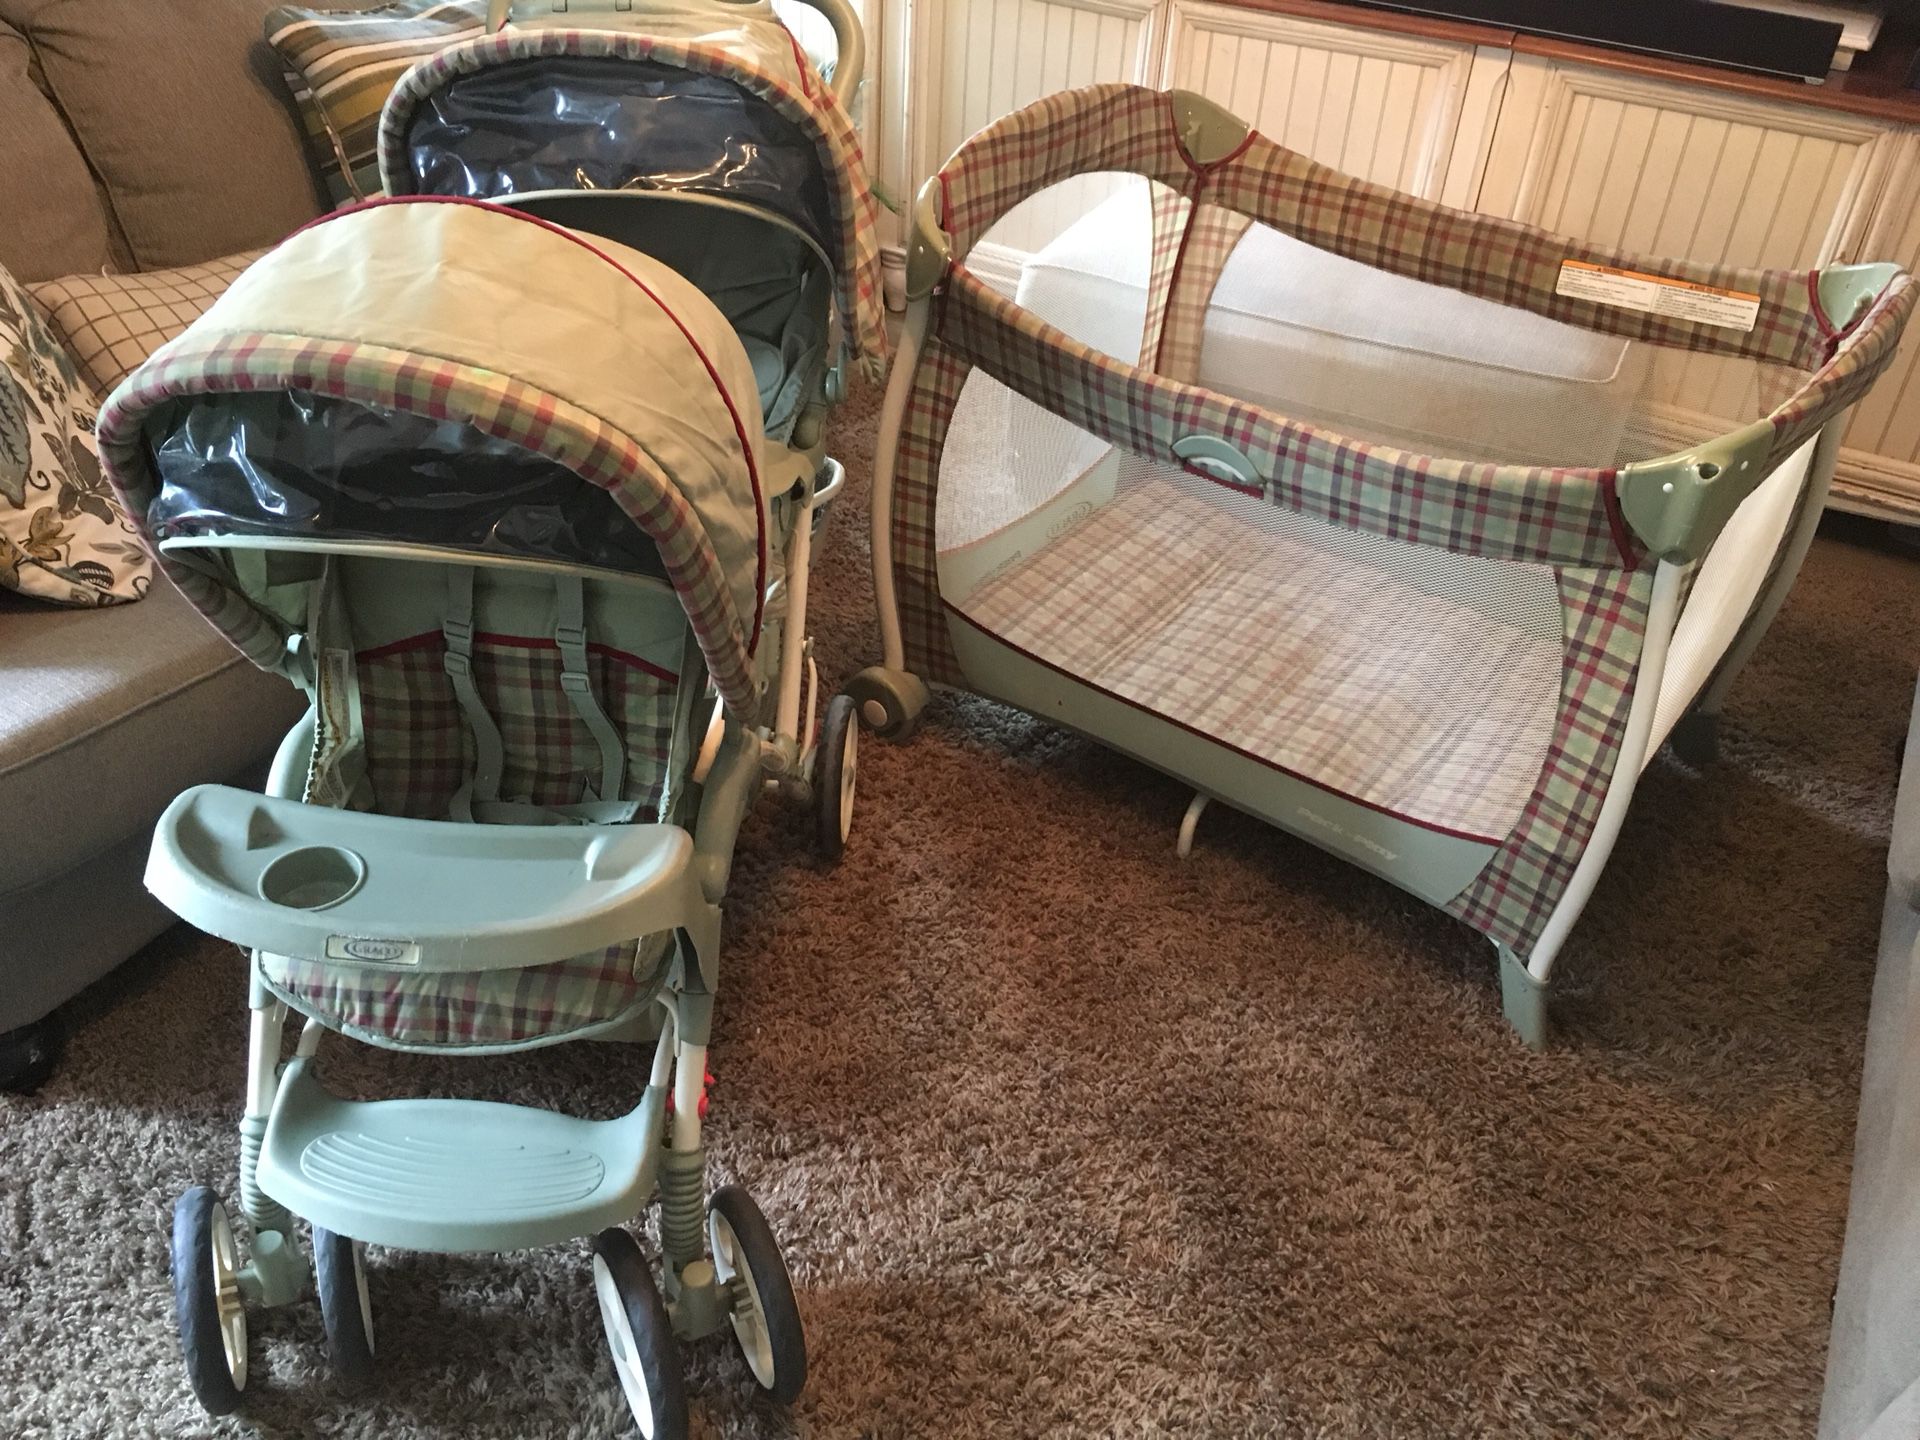 Double Stroller. Graco Duo Glider and matching Graco packnplay